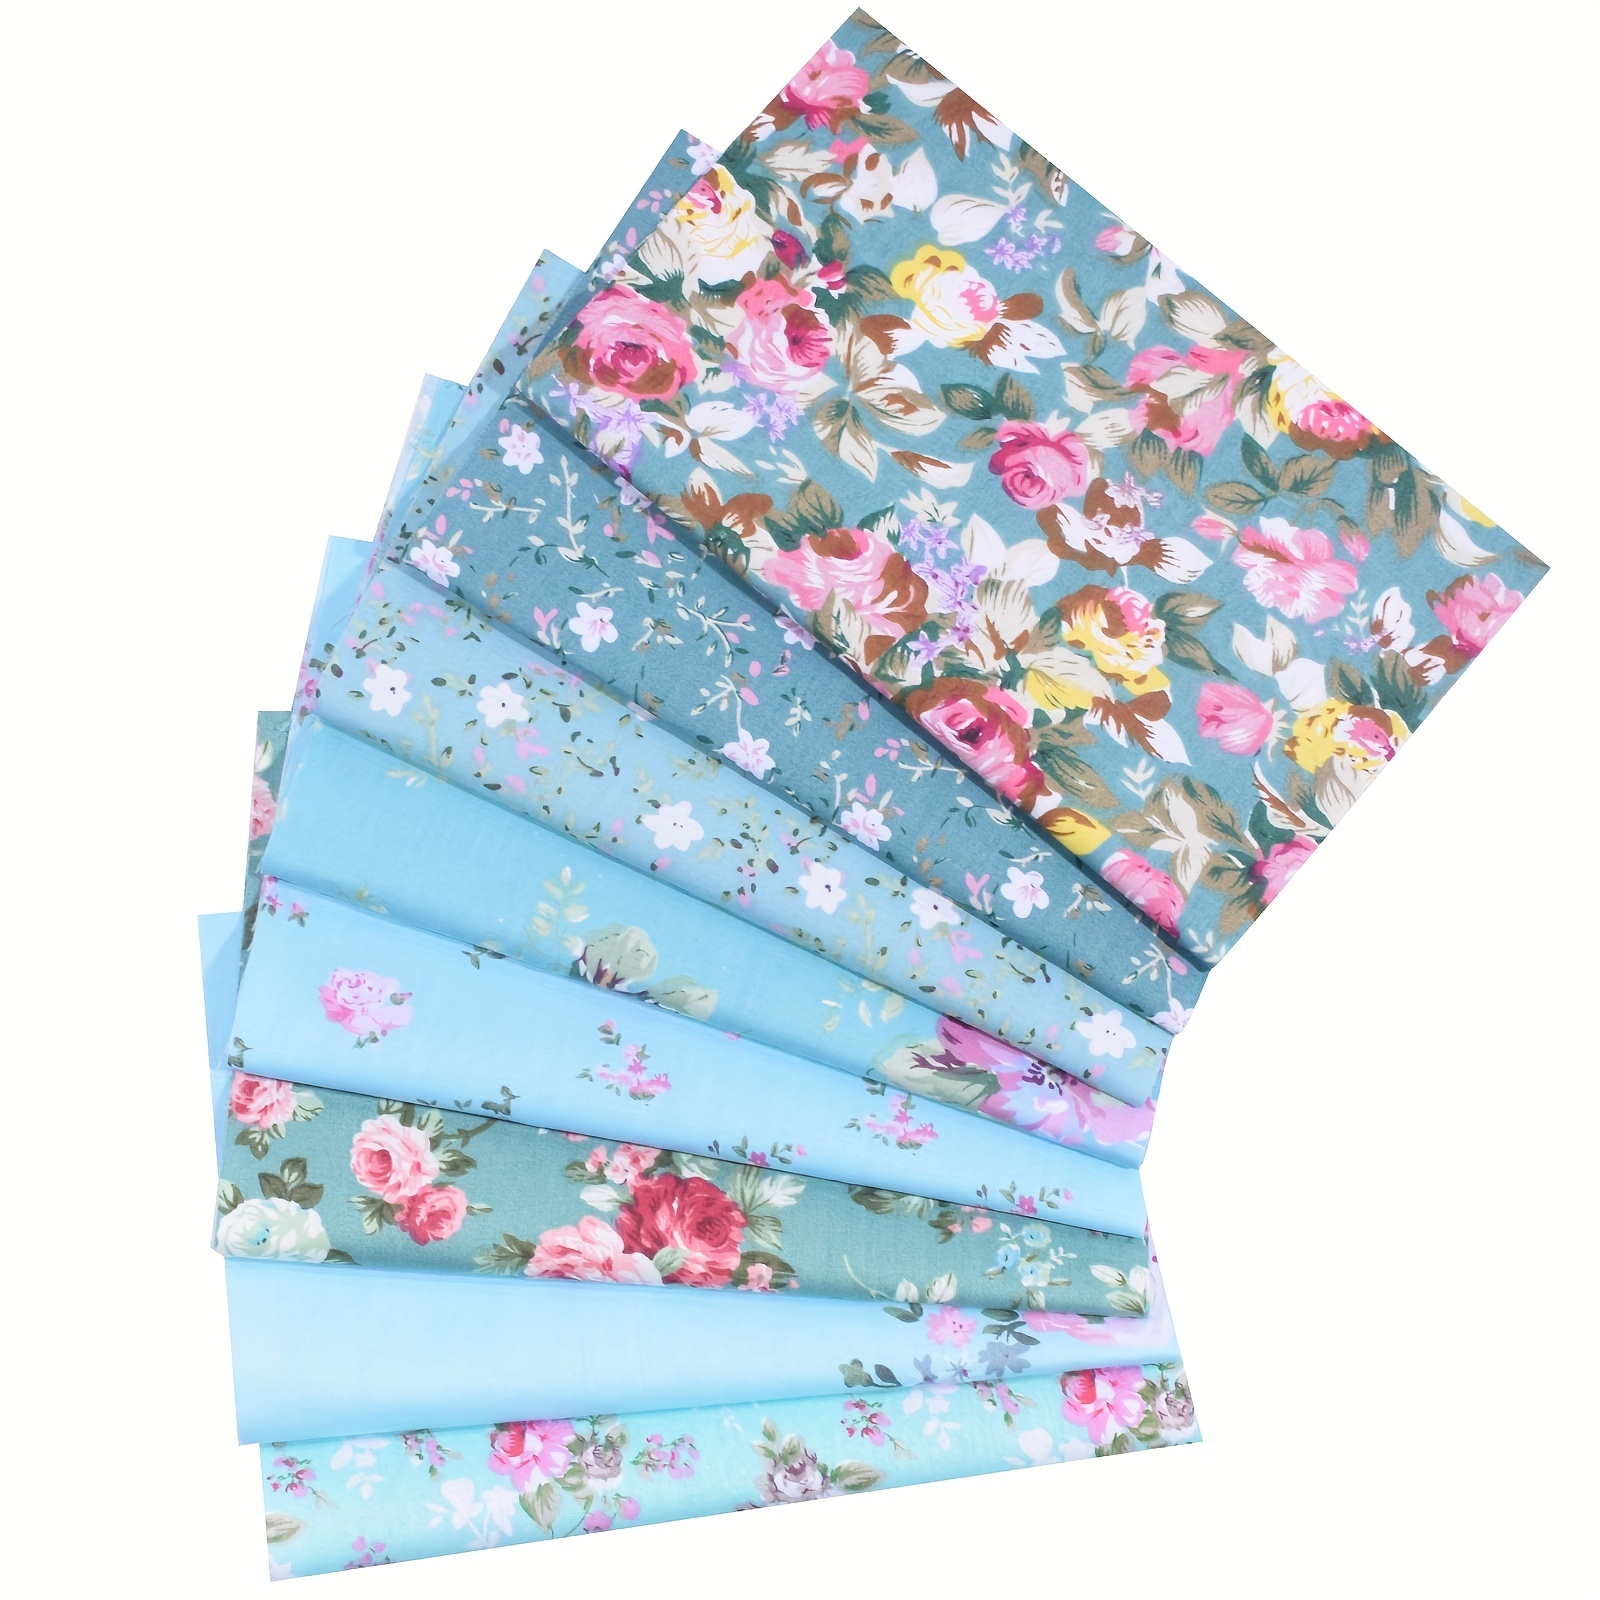 40pcs Floral Printed Quilting Fabric Cotton Craft DIY Handmade Doll Clothes  Fabric Precut For Patchwork DIY Handmade Craft Sewing Supplies